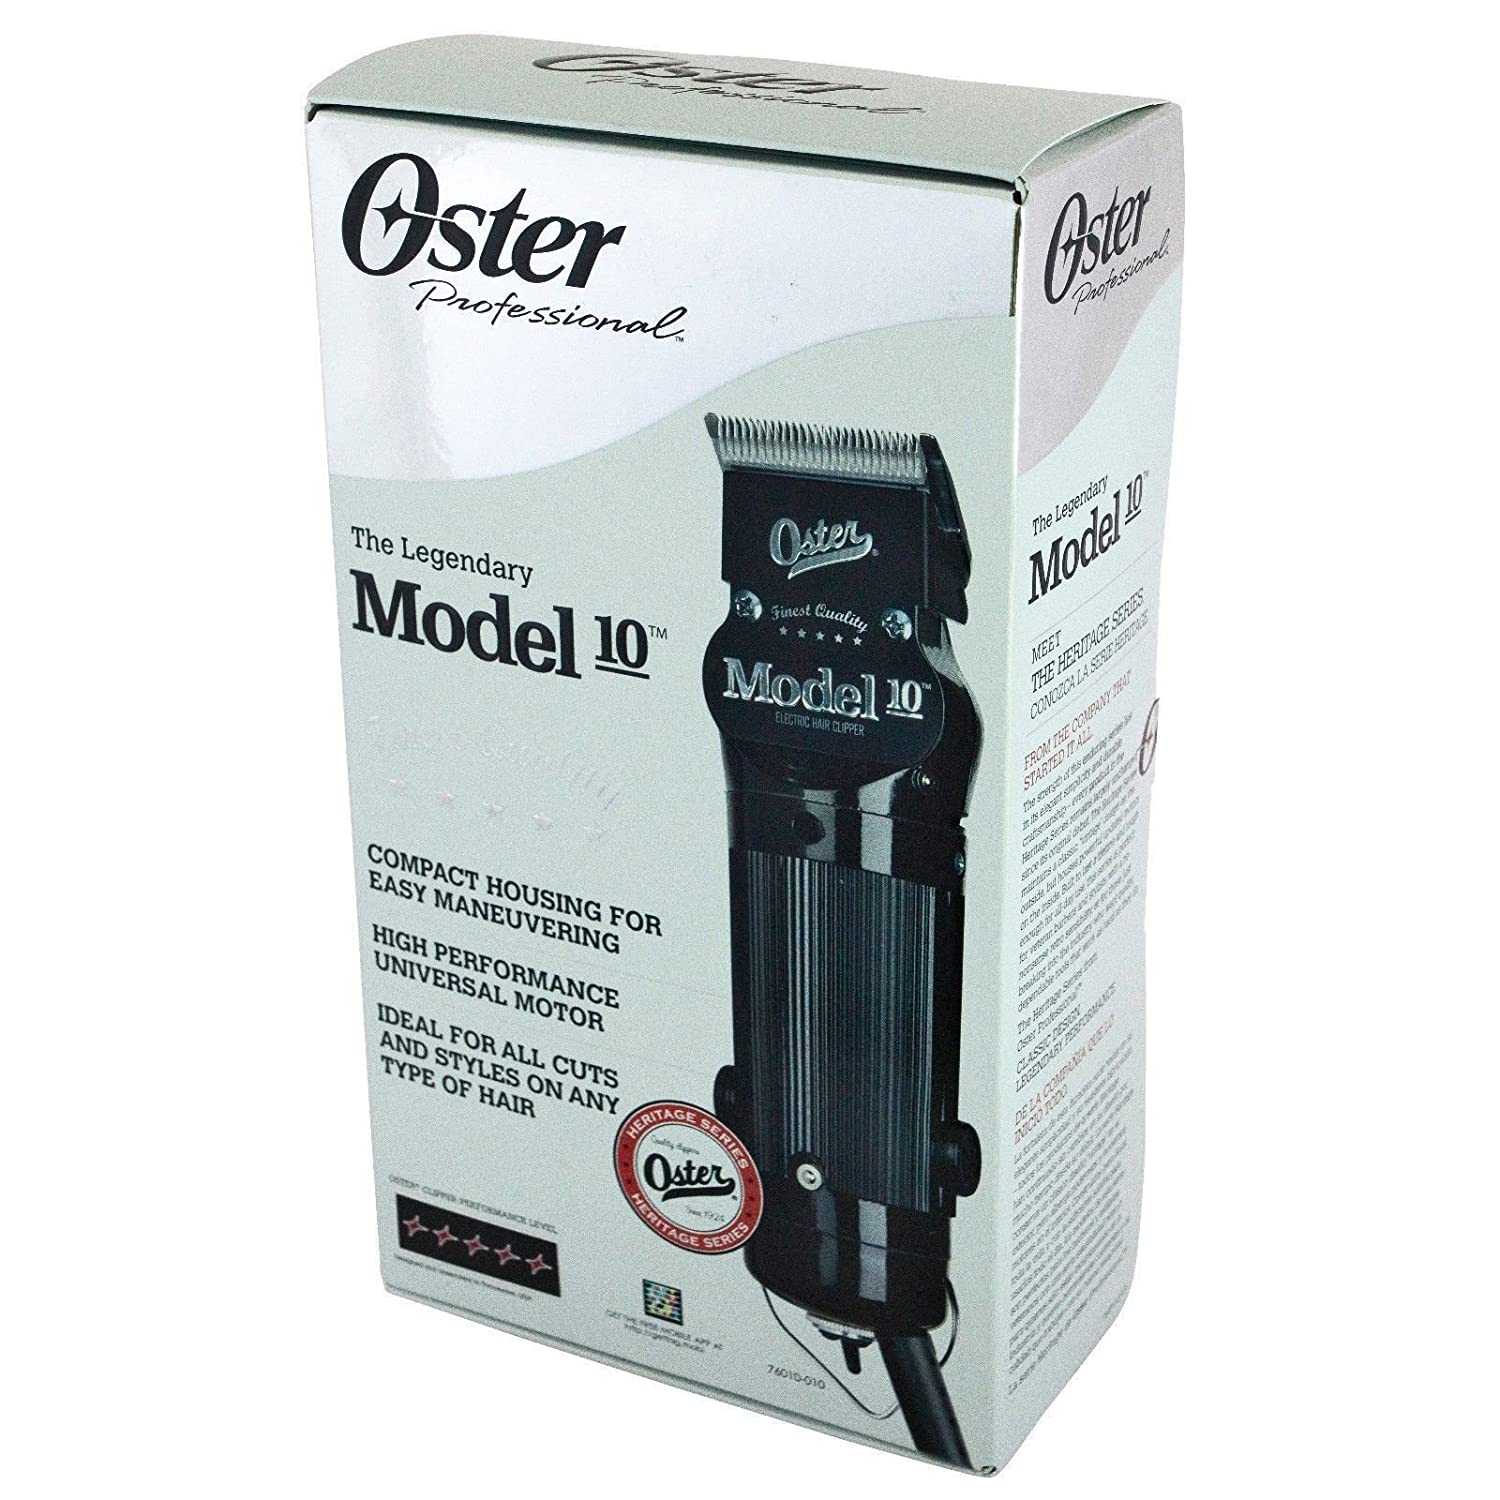 Oster Model 10 Classic Professional Barber Salon Pro Hair Grooming Clipper-1